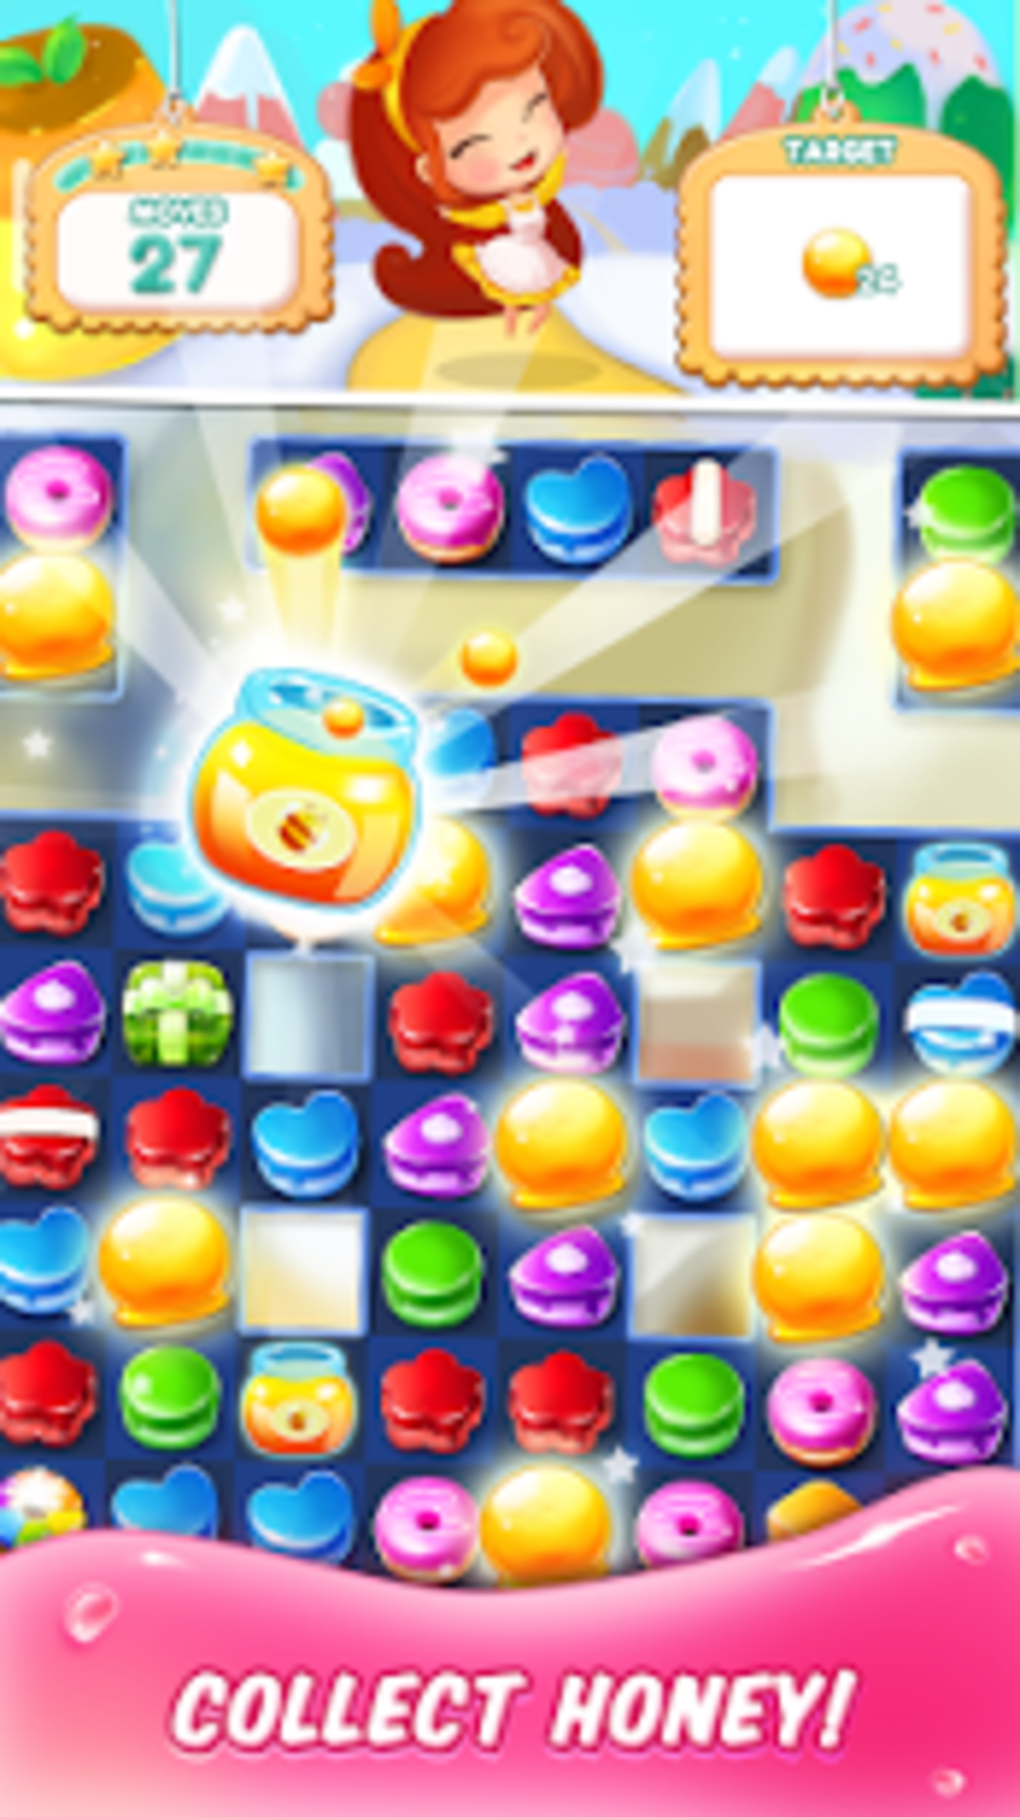 Cake mania 3 free download full version for android